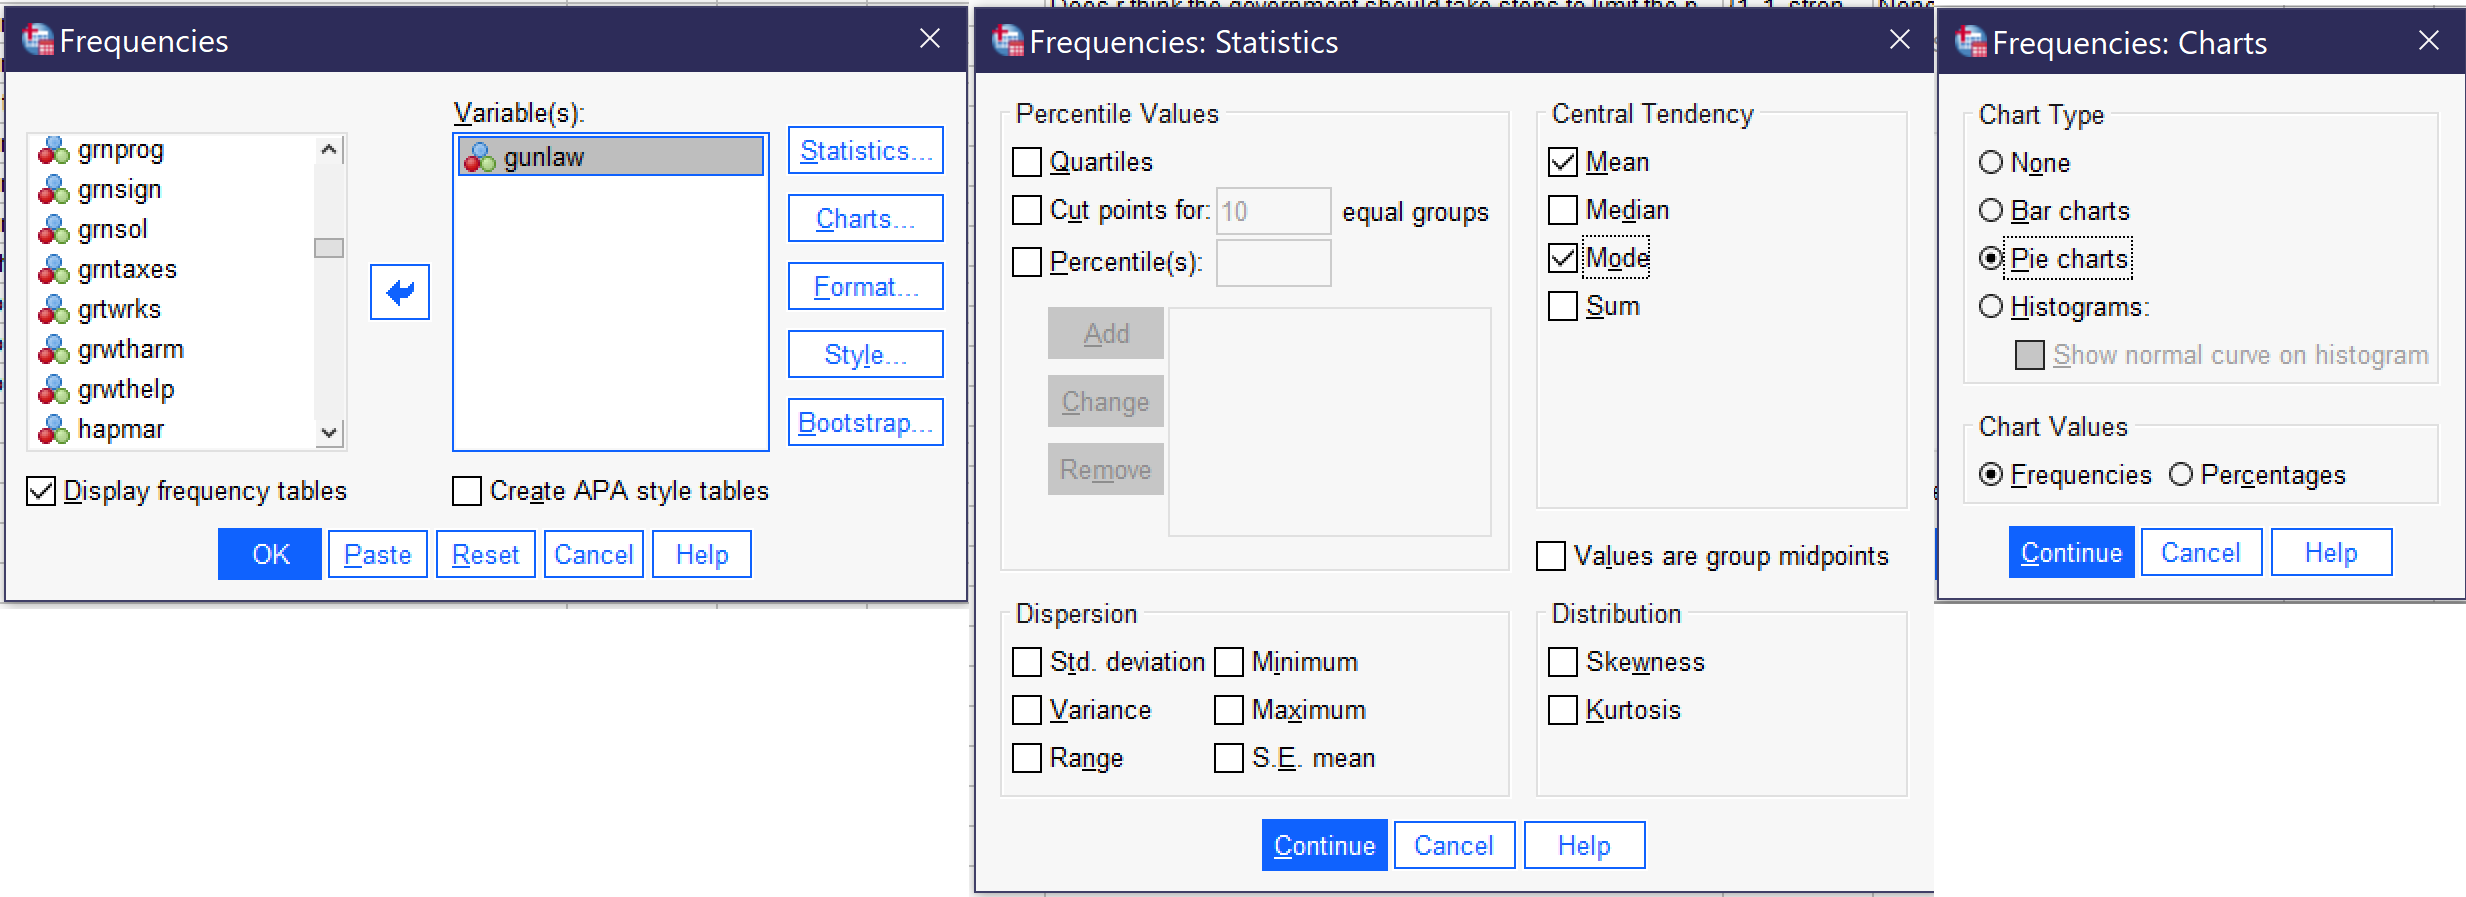 An image showing what the Frequencies, Statistics, and Charts dialogs look like with the options selected.